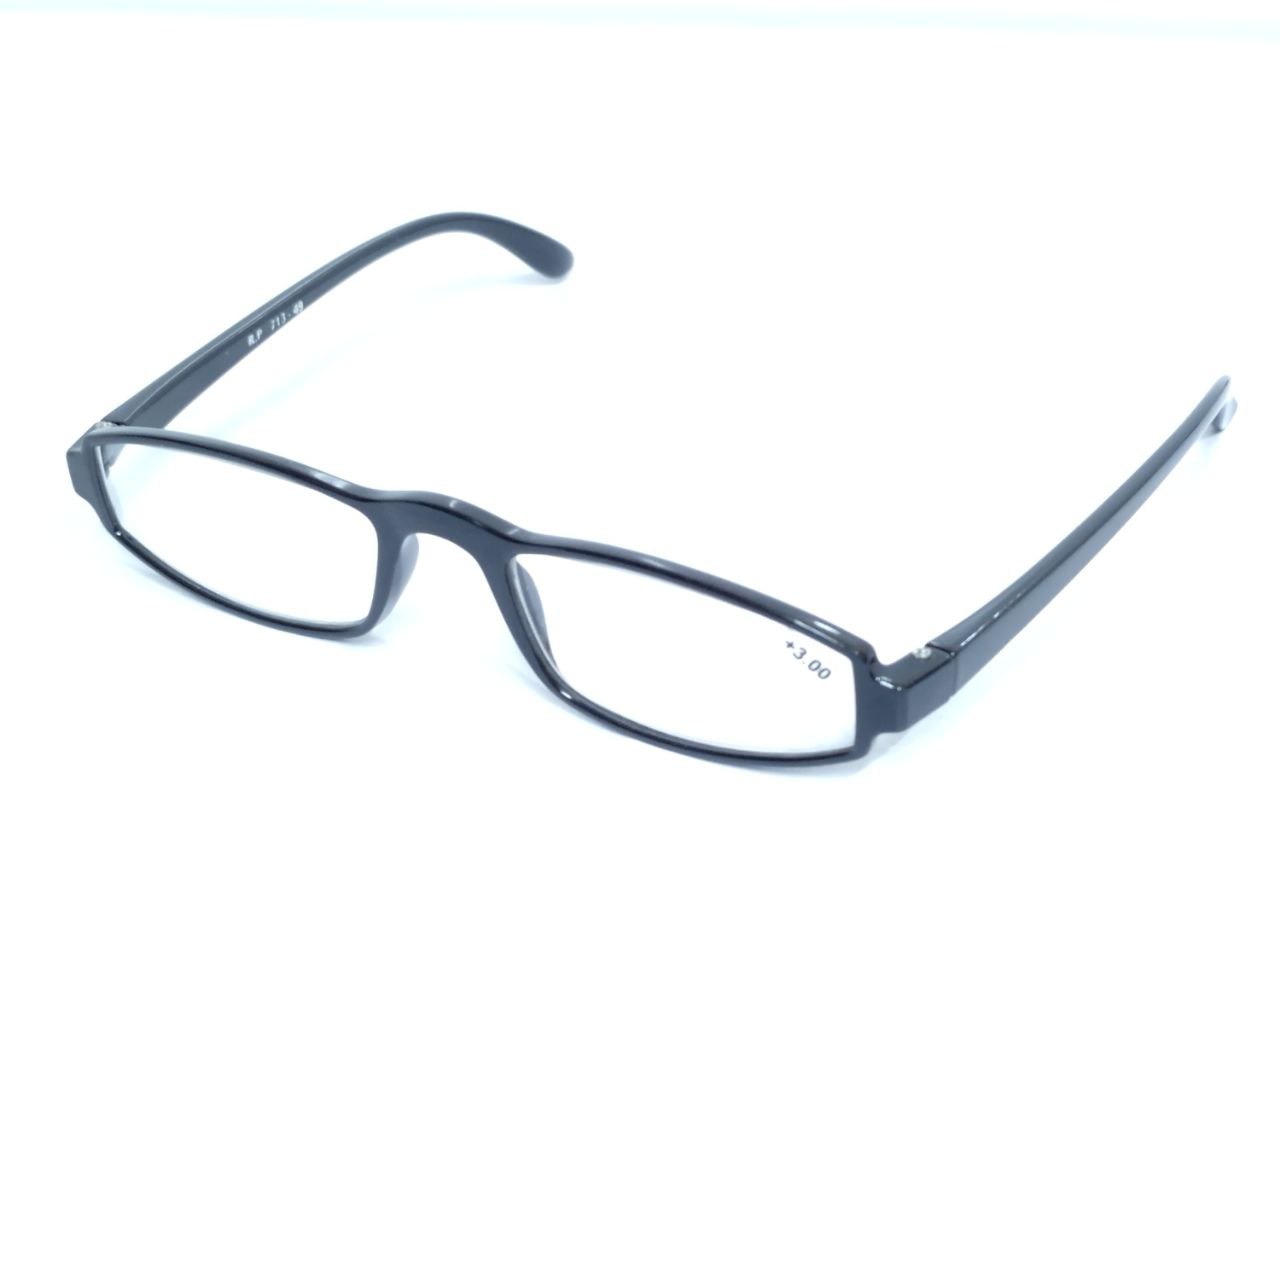 High Quality Black Computer Reading Glasses for Men and Women